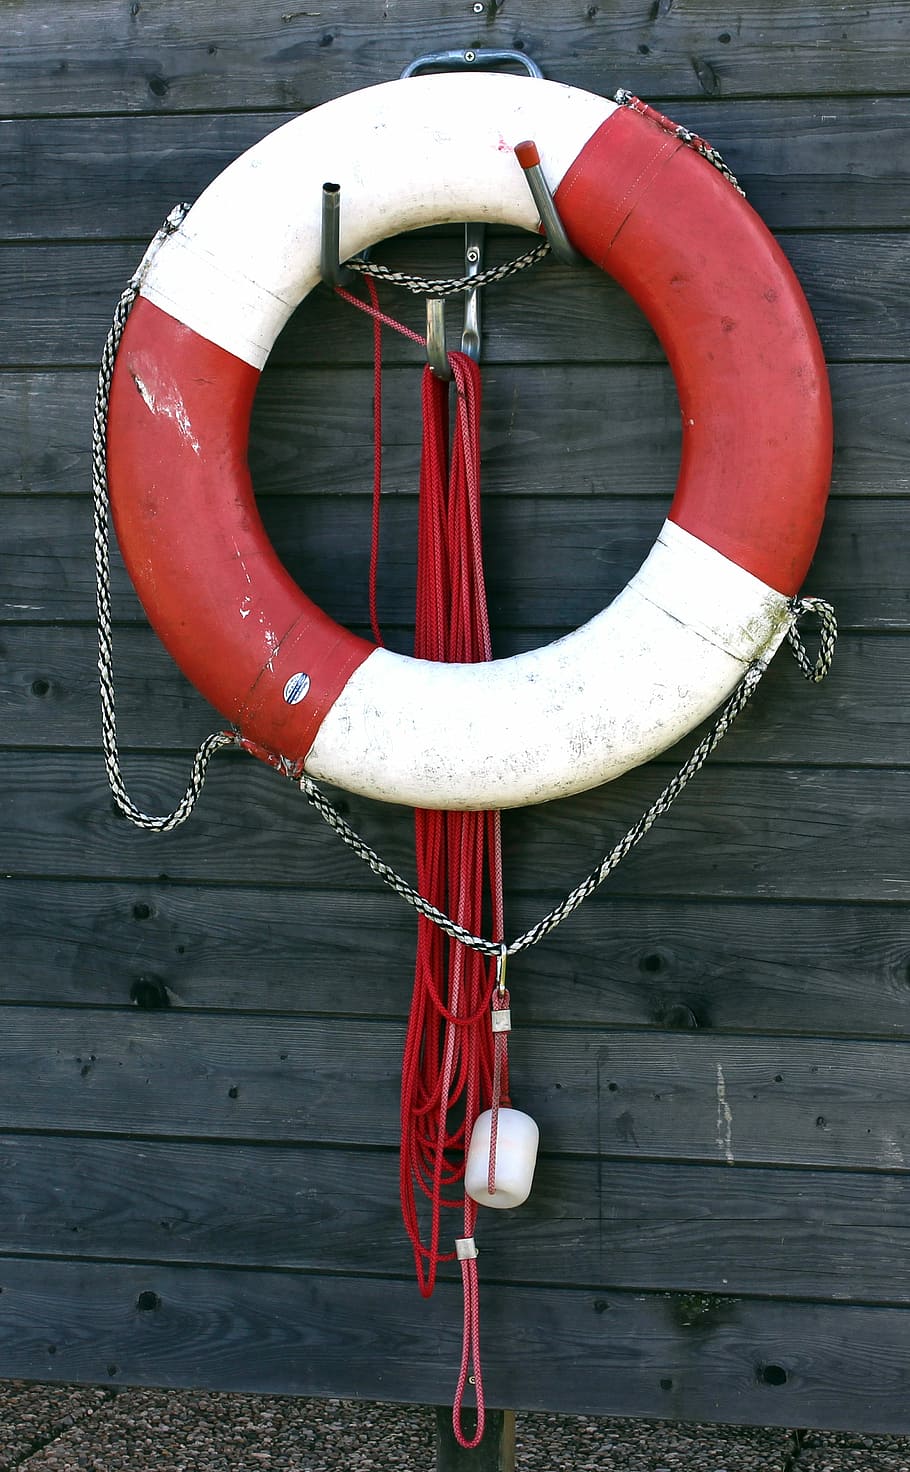 Lifebelt, Rescue, Emergency, red, water rescue, non swimmers, security, lifebuoys, rope, hanging